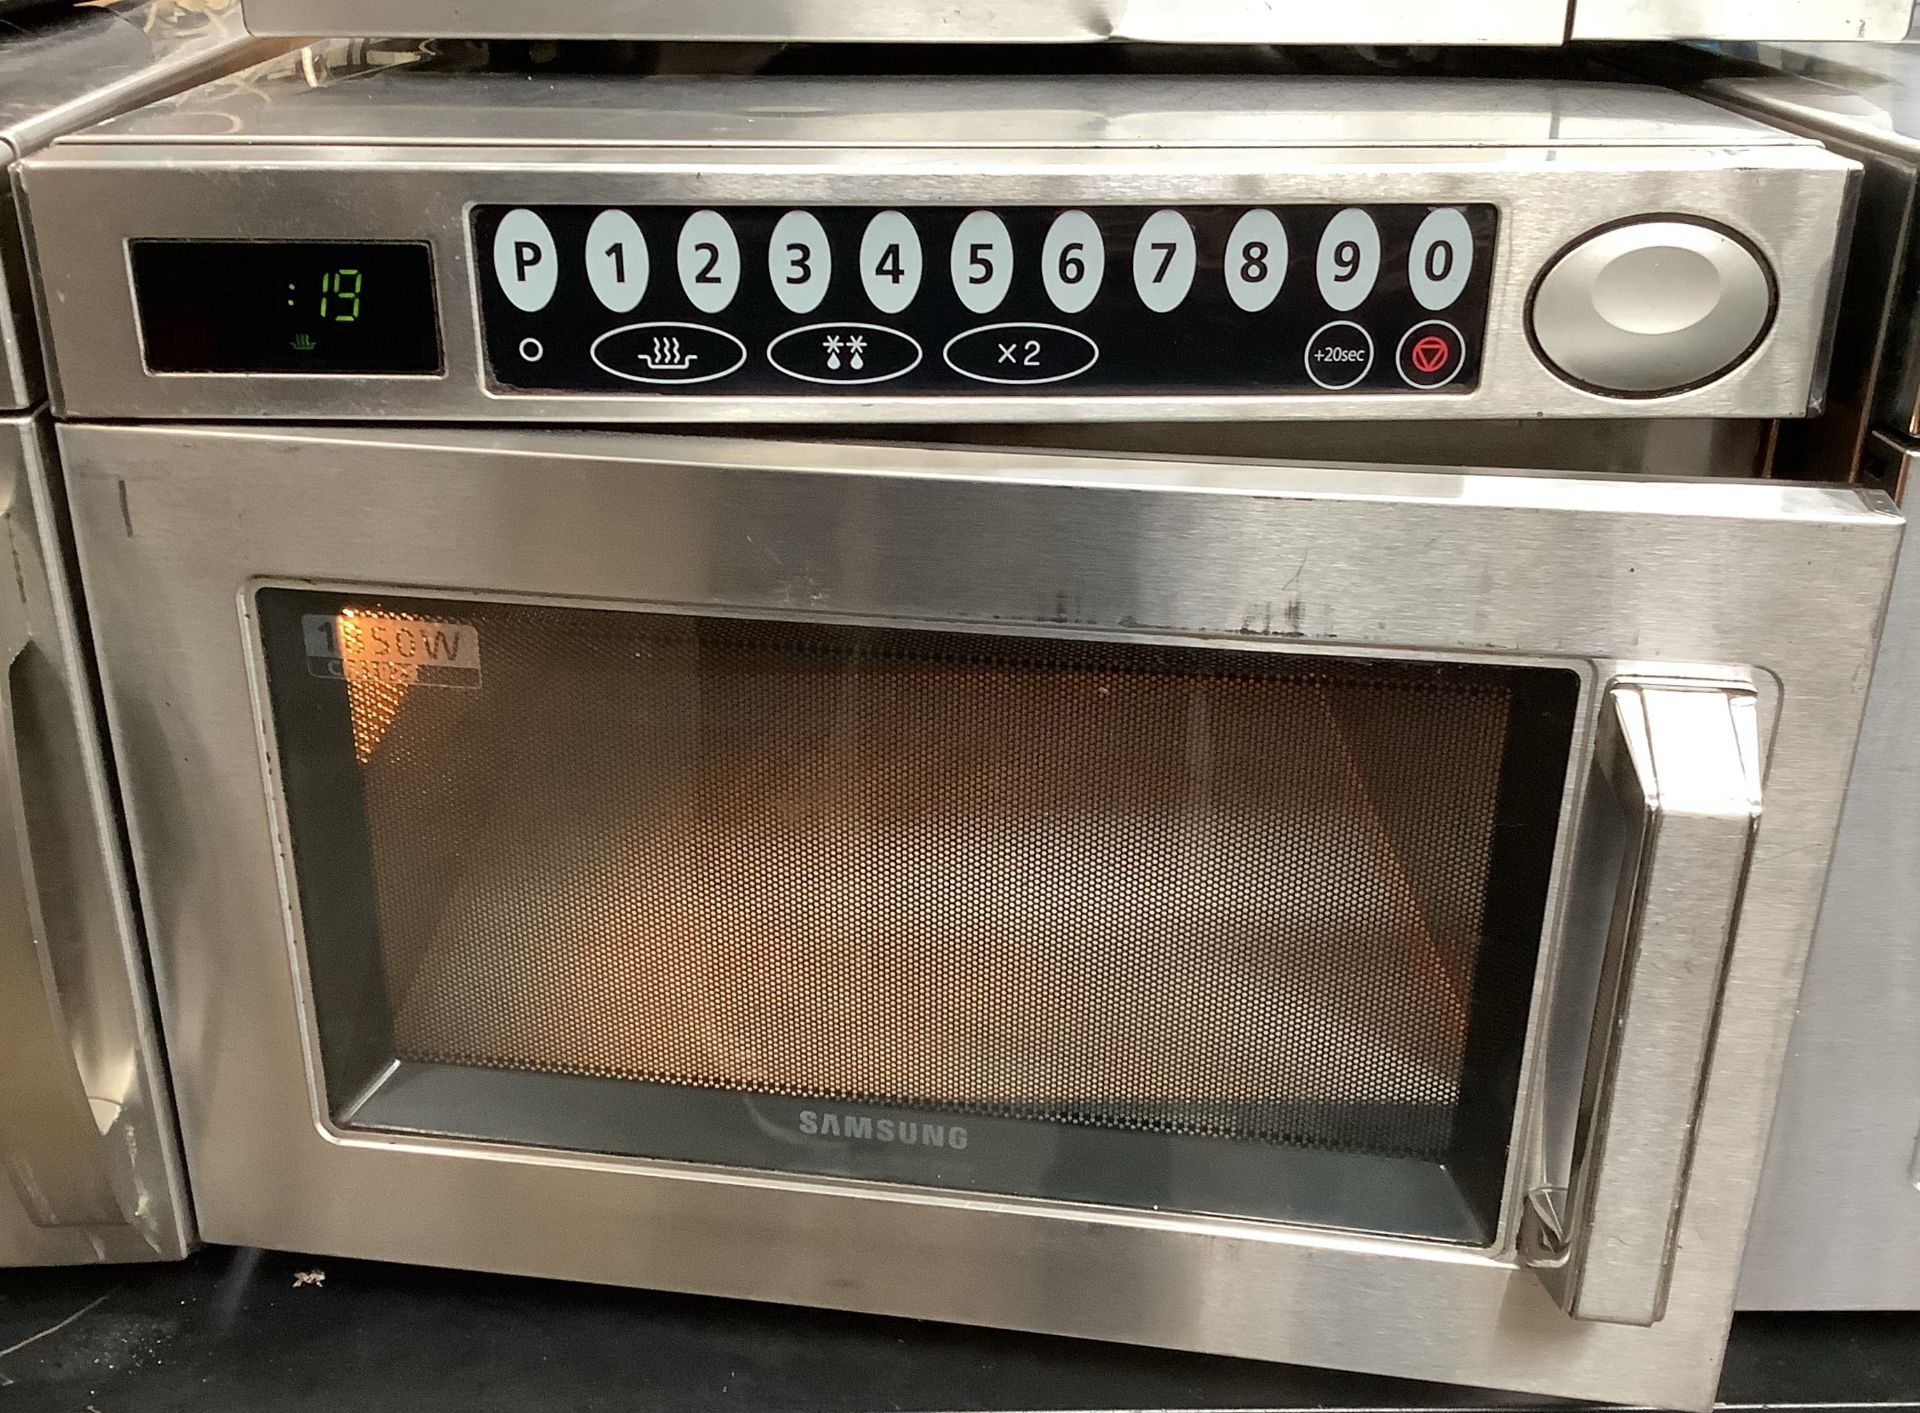 Samsung 1850w Commercial Microwave - Image 2 of 2